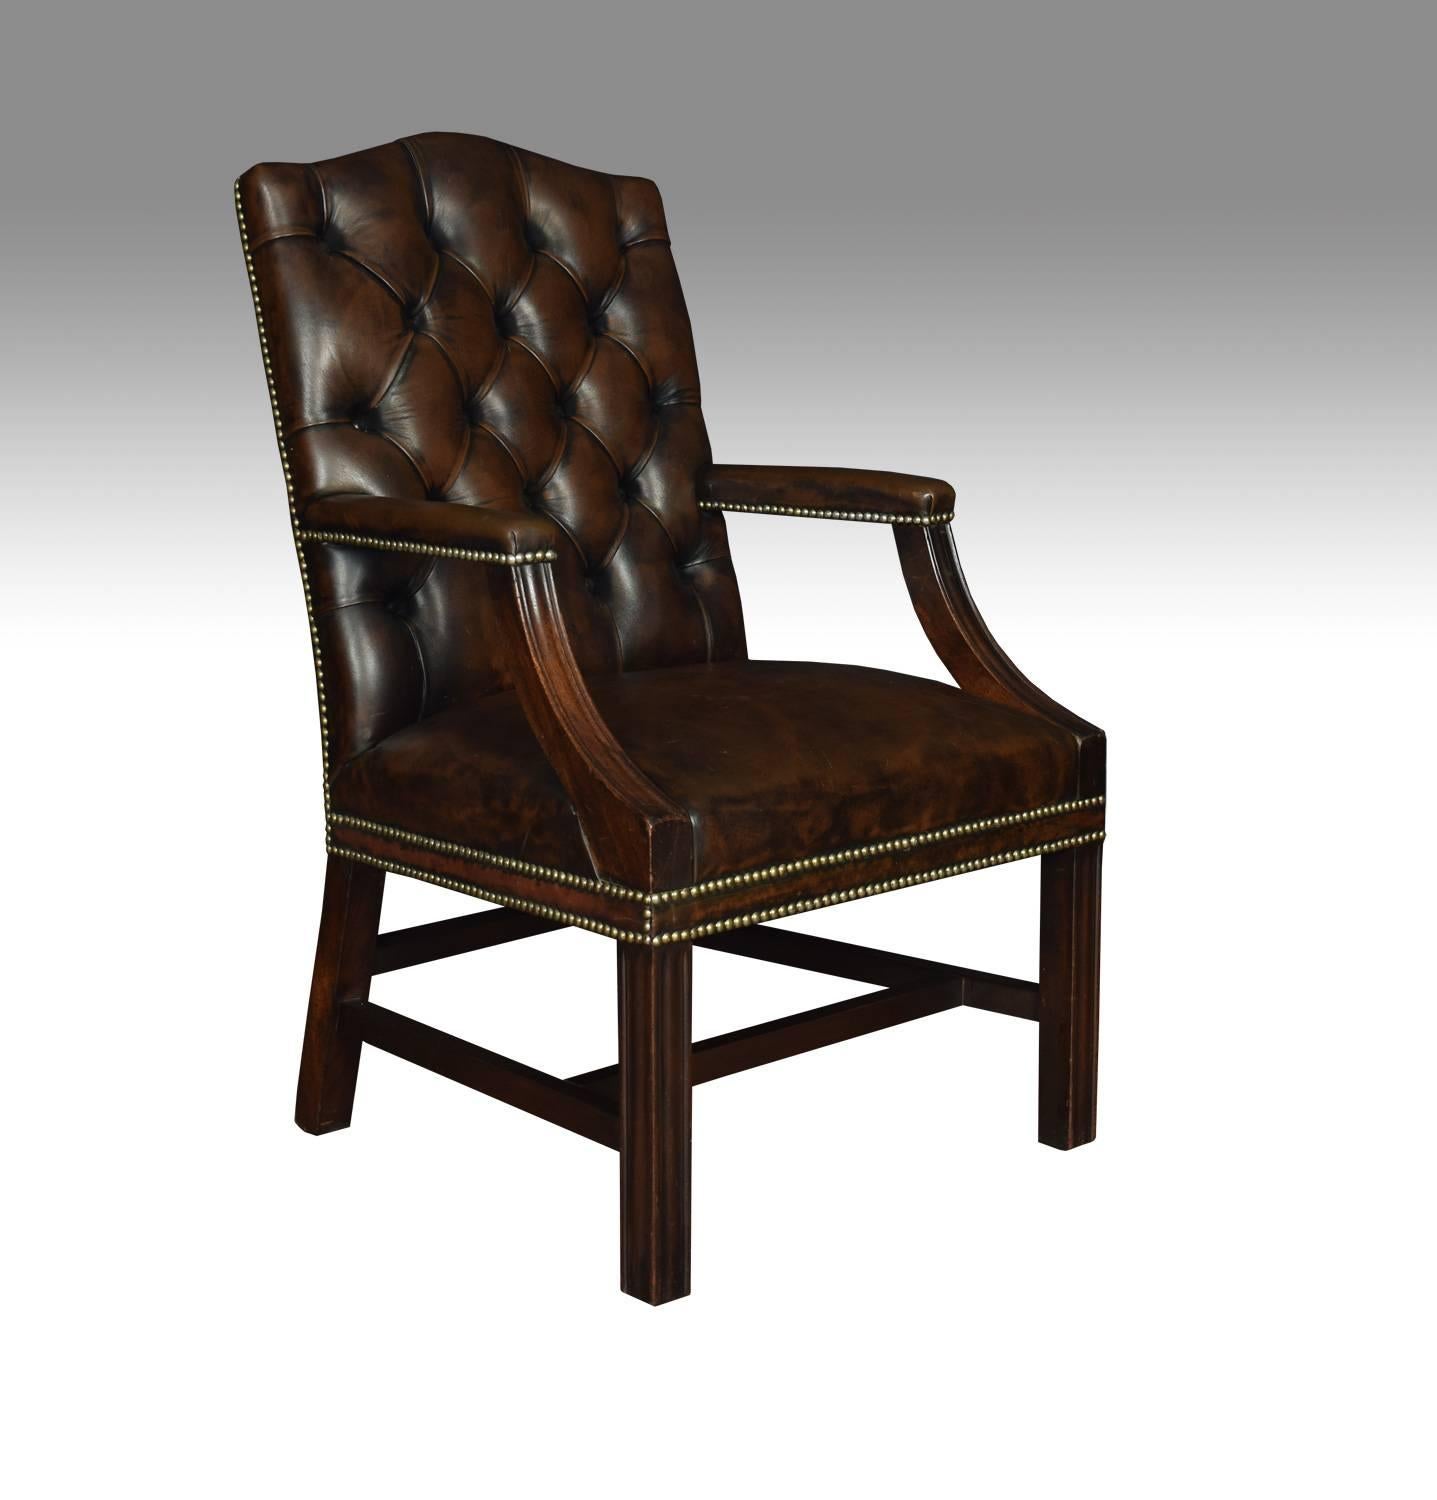 Pair of Georgian style leather Gainsborough, library chairs antique armchairs, having deep buttoned brown leather backs and overstuffed seats with brass studded edges. The solid mahogany framed standing on square legs, united by